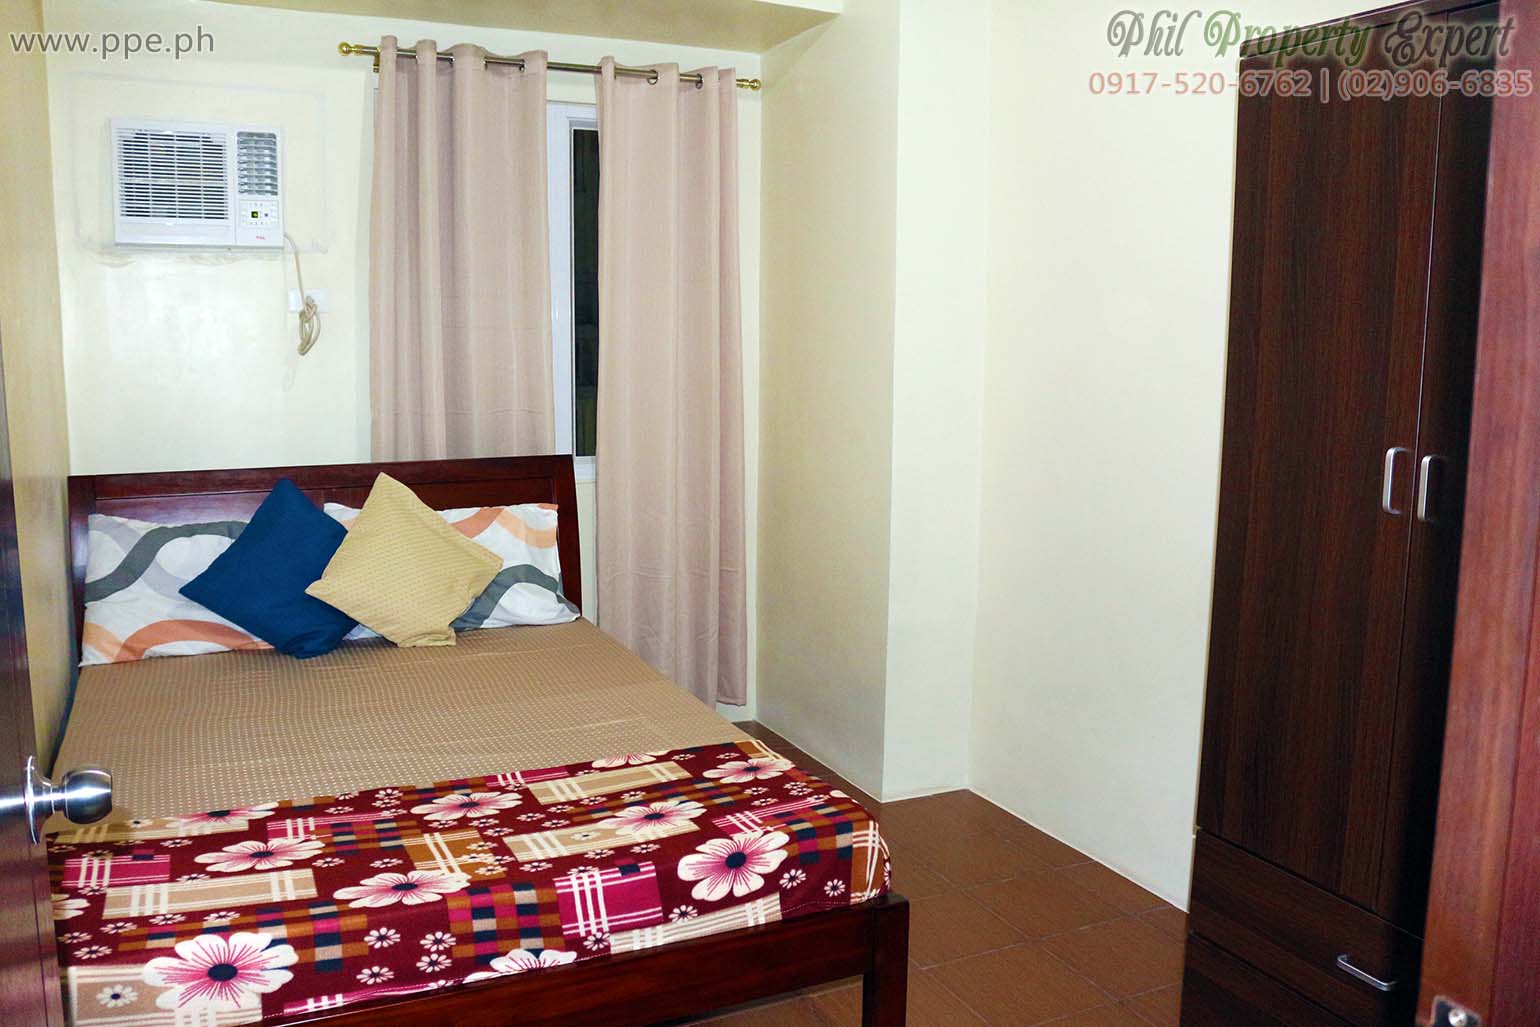 Pioneer Woodlands Condo For Rent In Boni Area Mandaluyong 2br